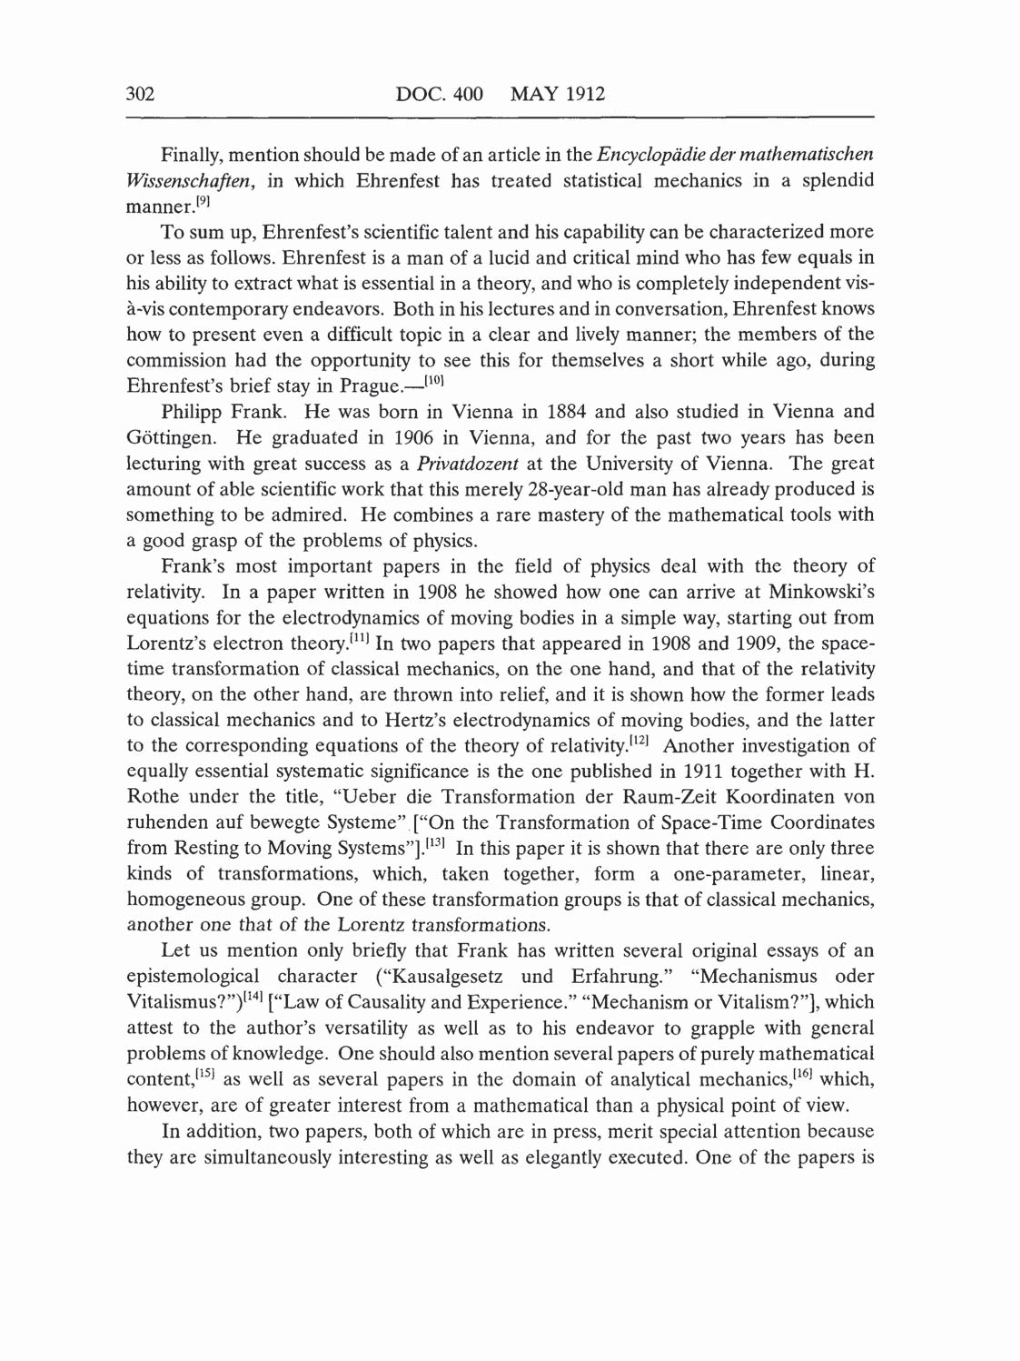 Volume 5: The Swiss Years: Correspondence, 1902-1914 (English translation supplement) page 302